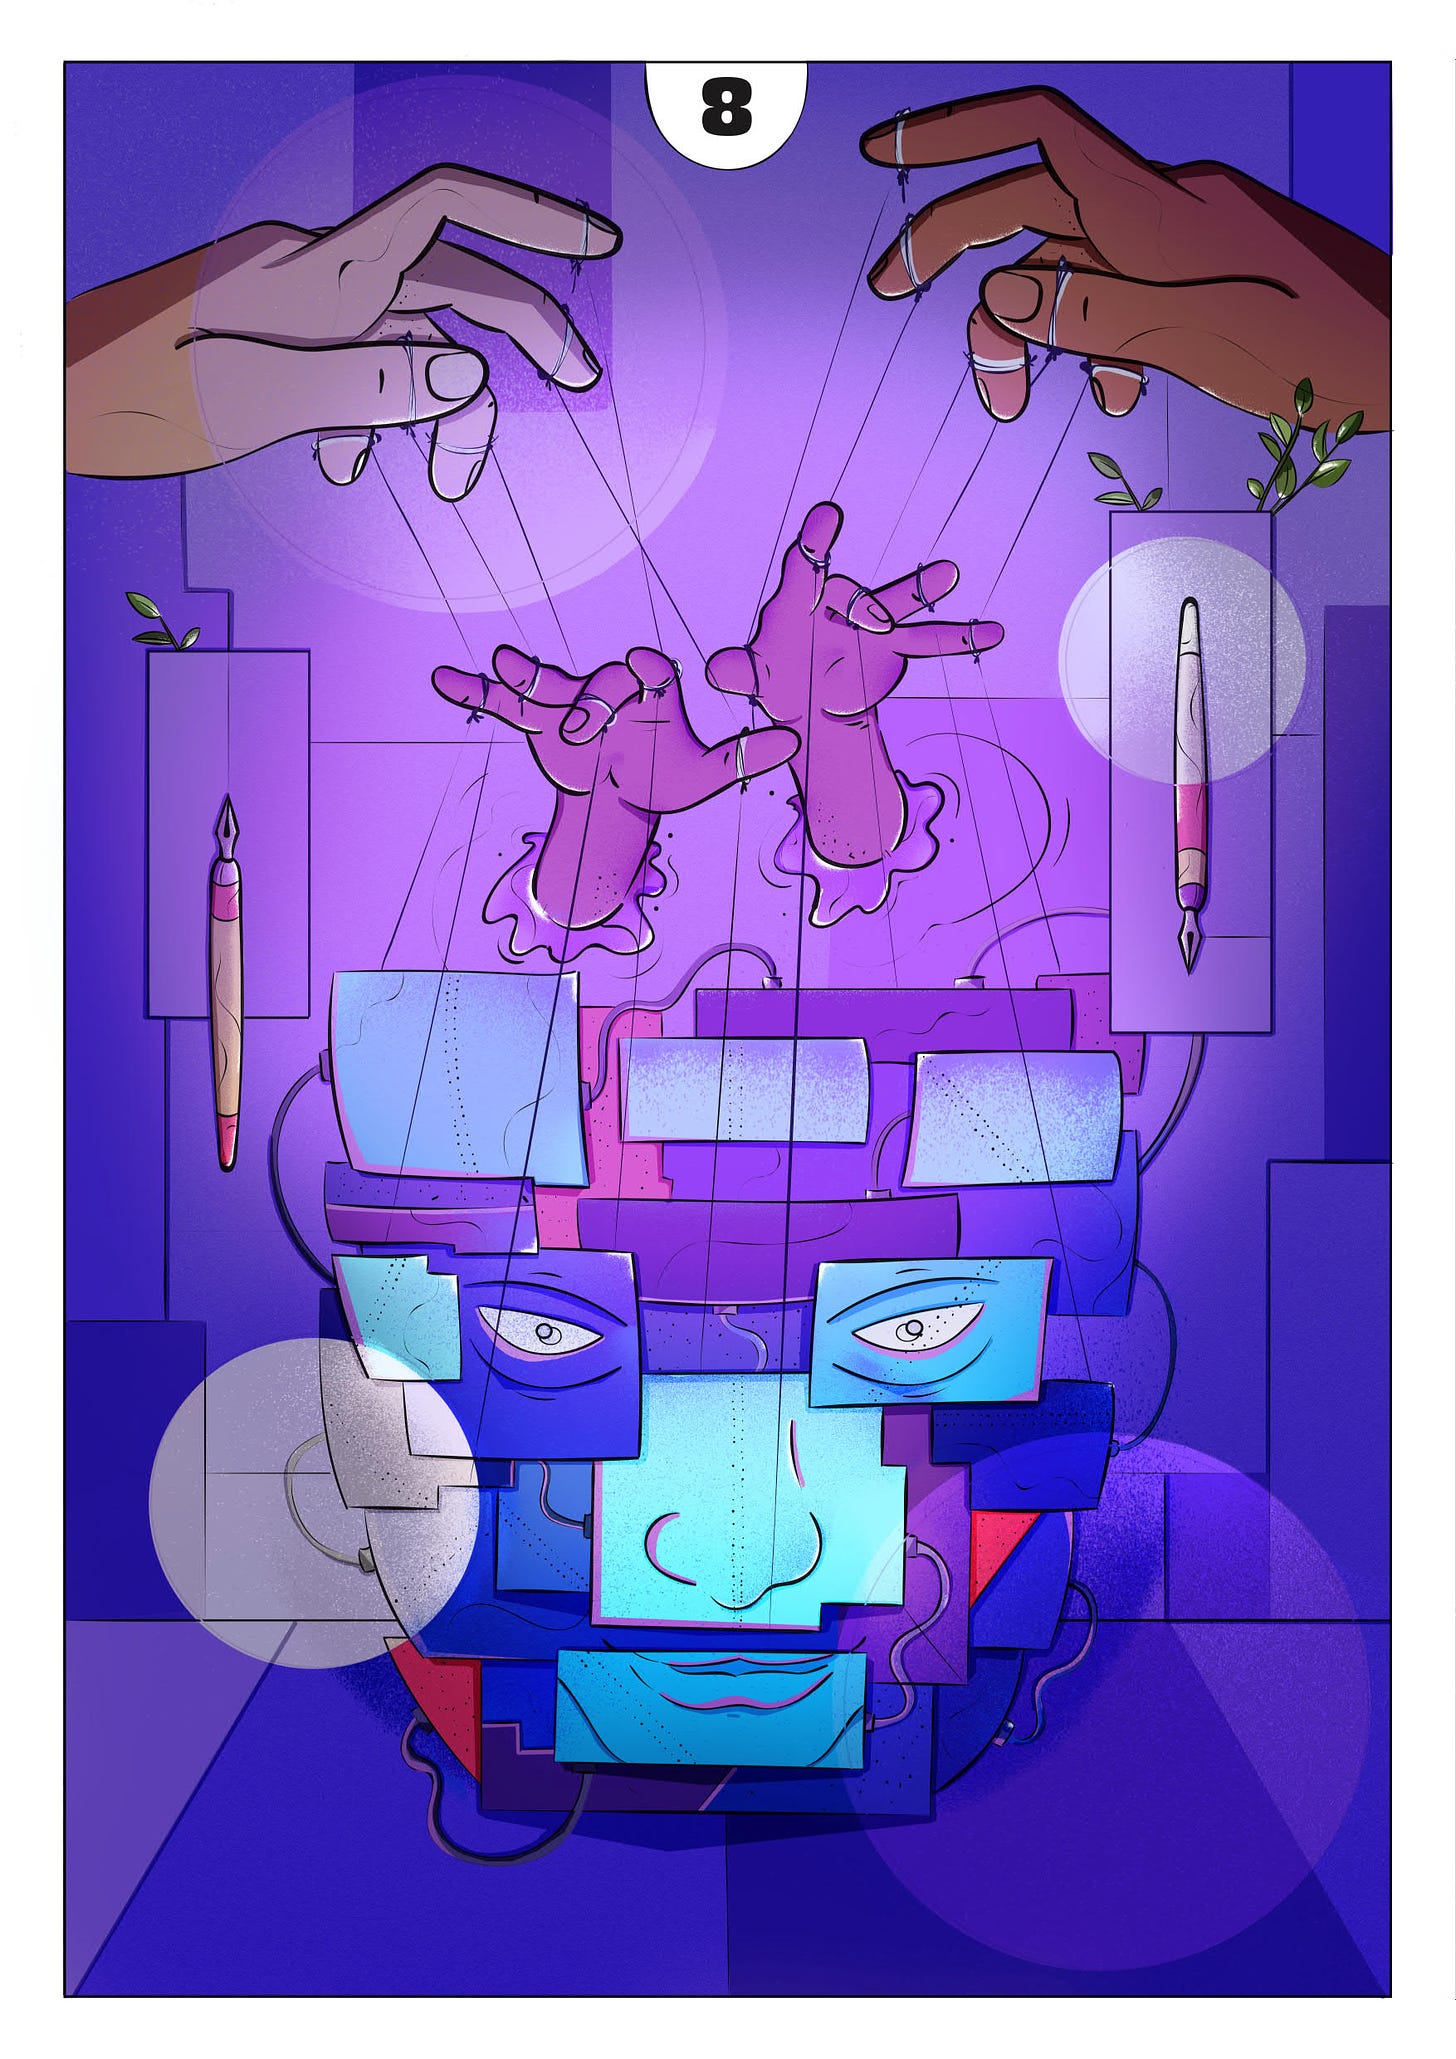 ‘Characterisation’ - Illustration by Carol Michelon for Master the Art and Craft of Writing by Leon Conrad with a puppeteer manipulating another puppeteer's hands manipulating different aspects of a character's face and mind. To the side, pens poised vertically pointing upwards and downwards against a predominantly purple background of rectangles and squares